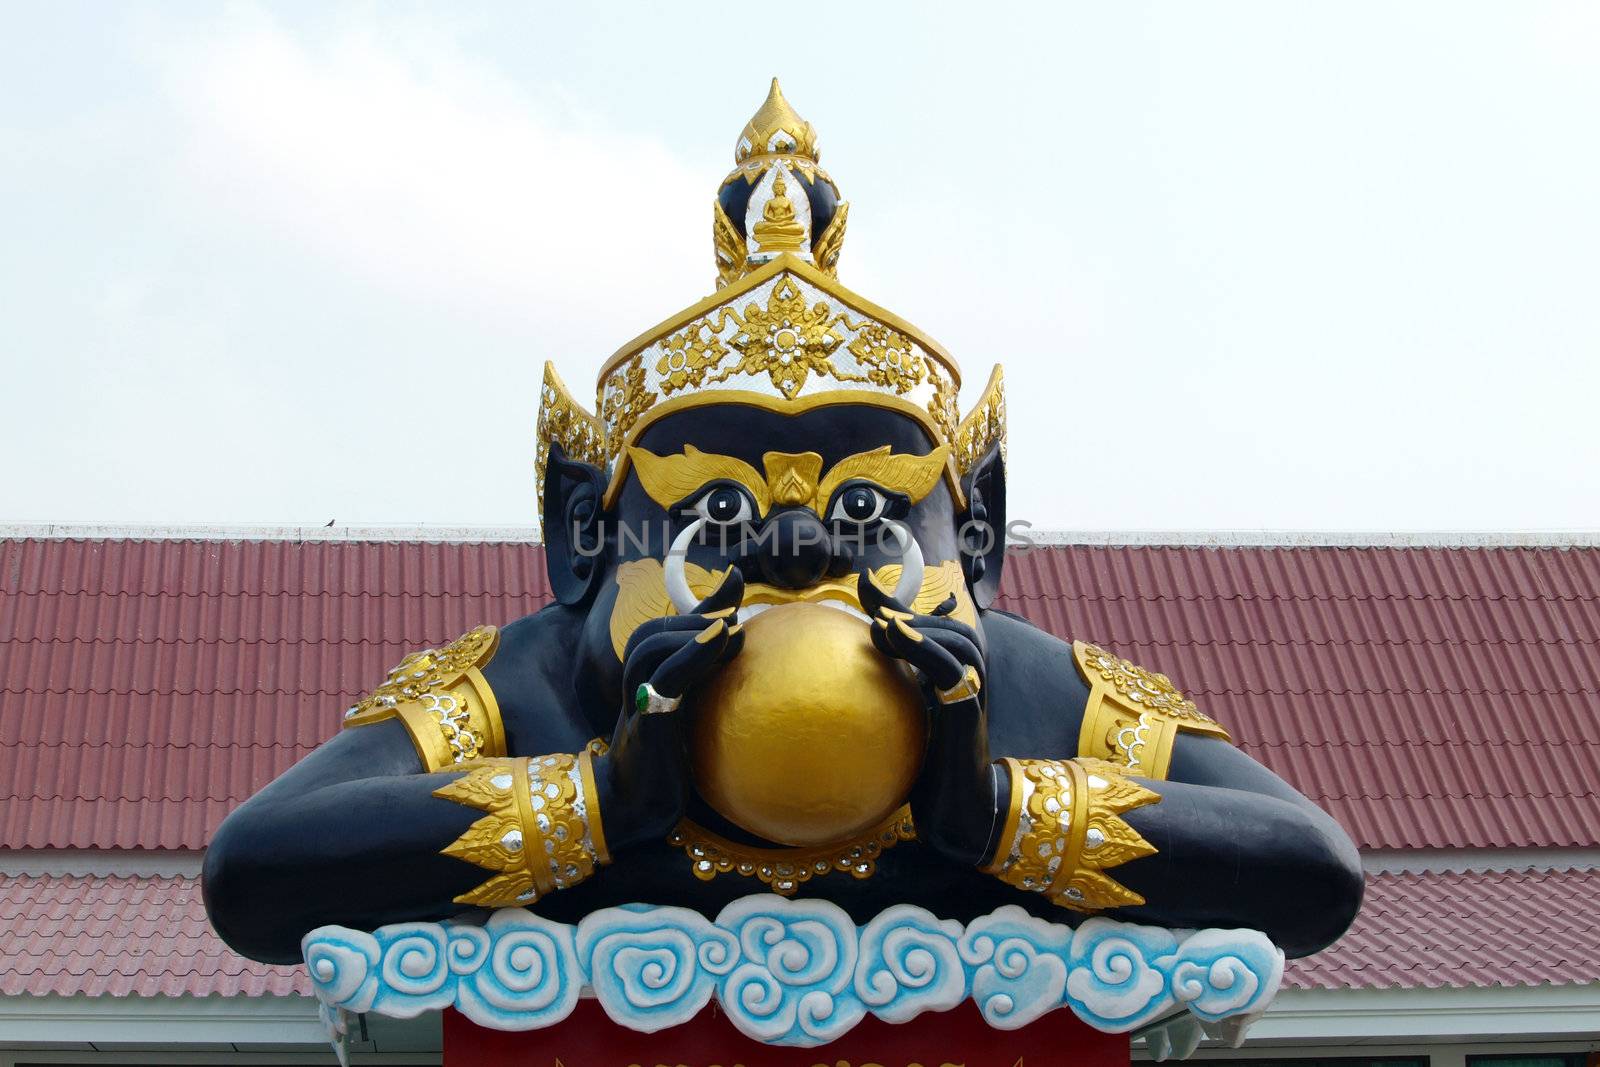 Rahu statue at the temple in Thailand by jakgree